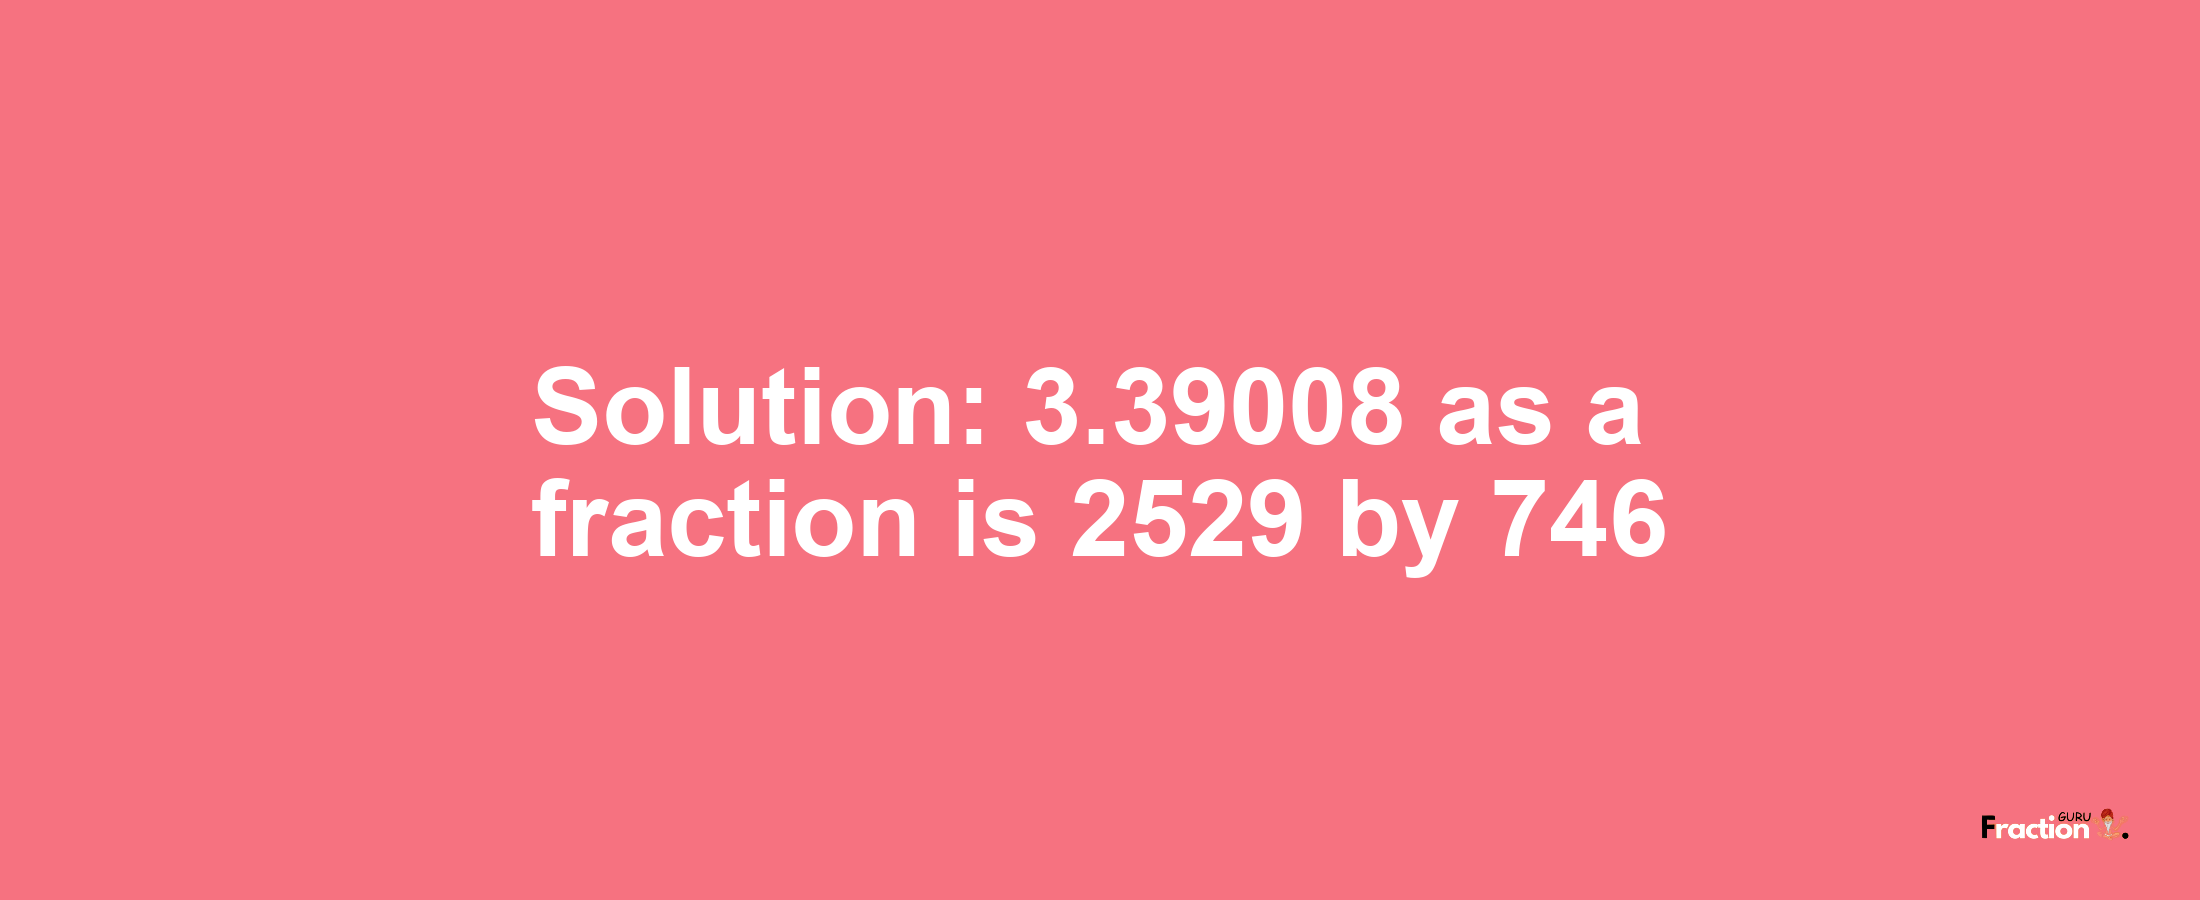 Solution:3.39008 as a fraction is 2529/746